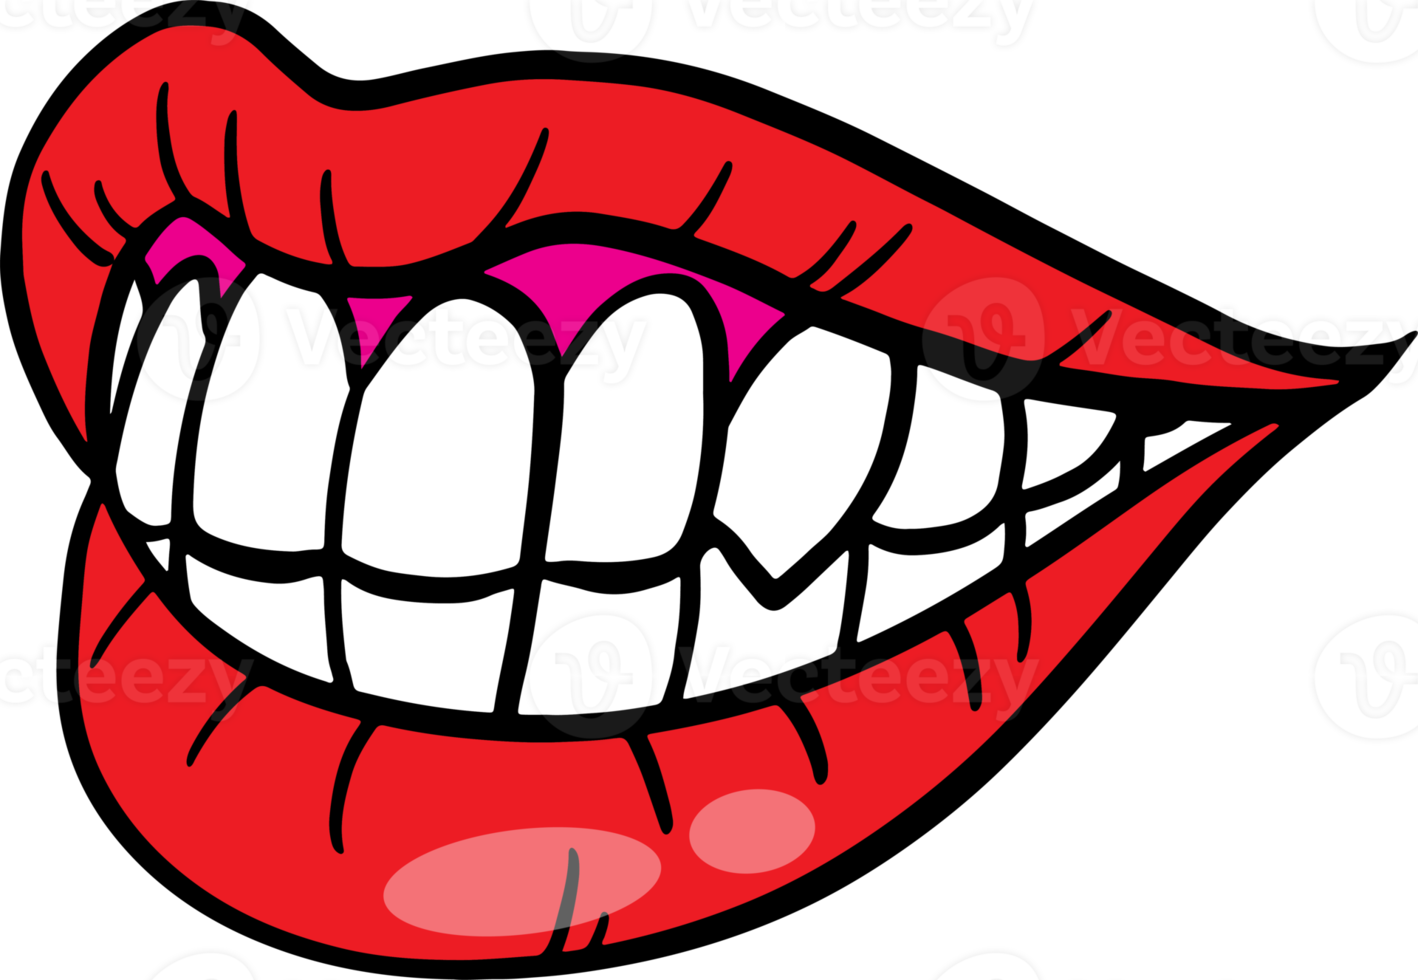 The red lip cartoon drawing for stamp or sticker png